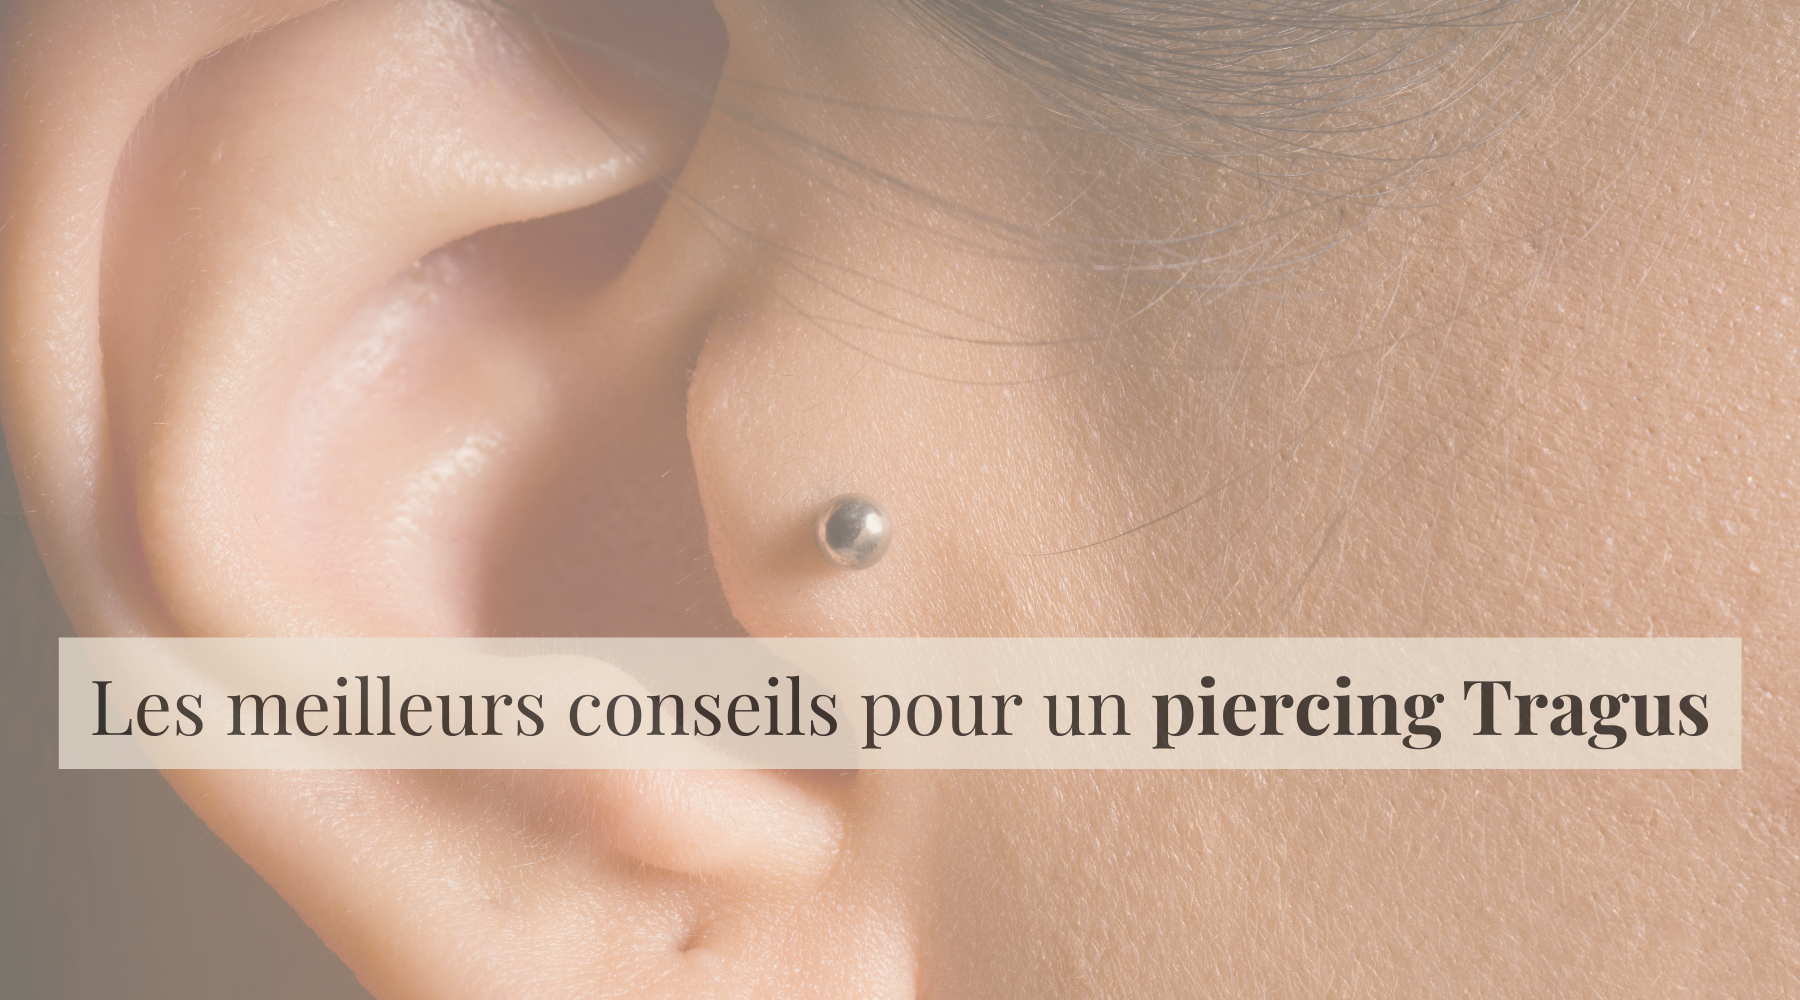 How to Cover an Ear Piercing for Swimming: 3 Best Methods